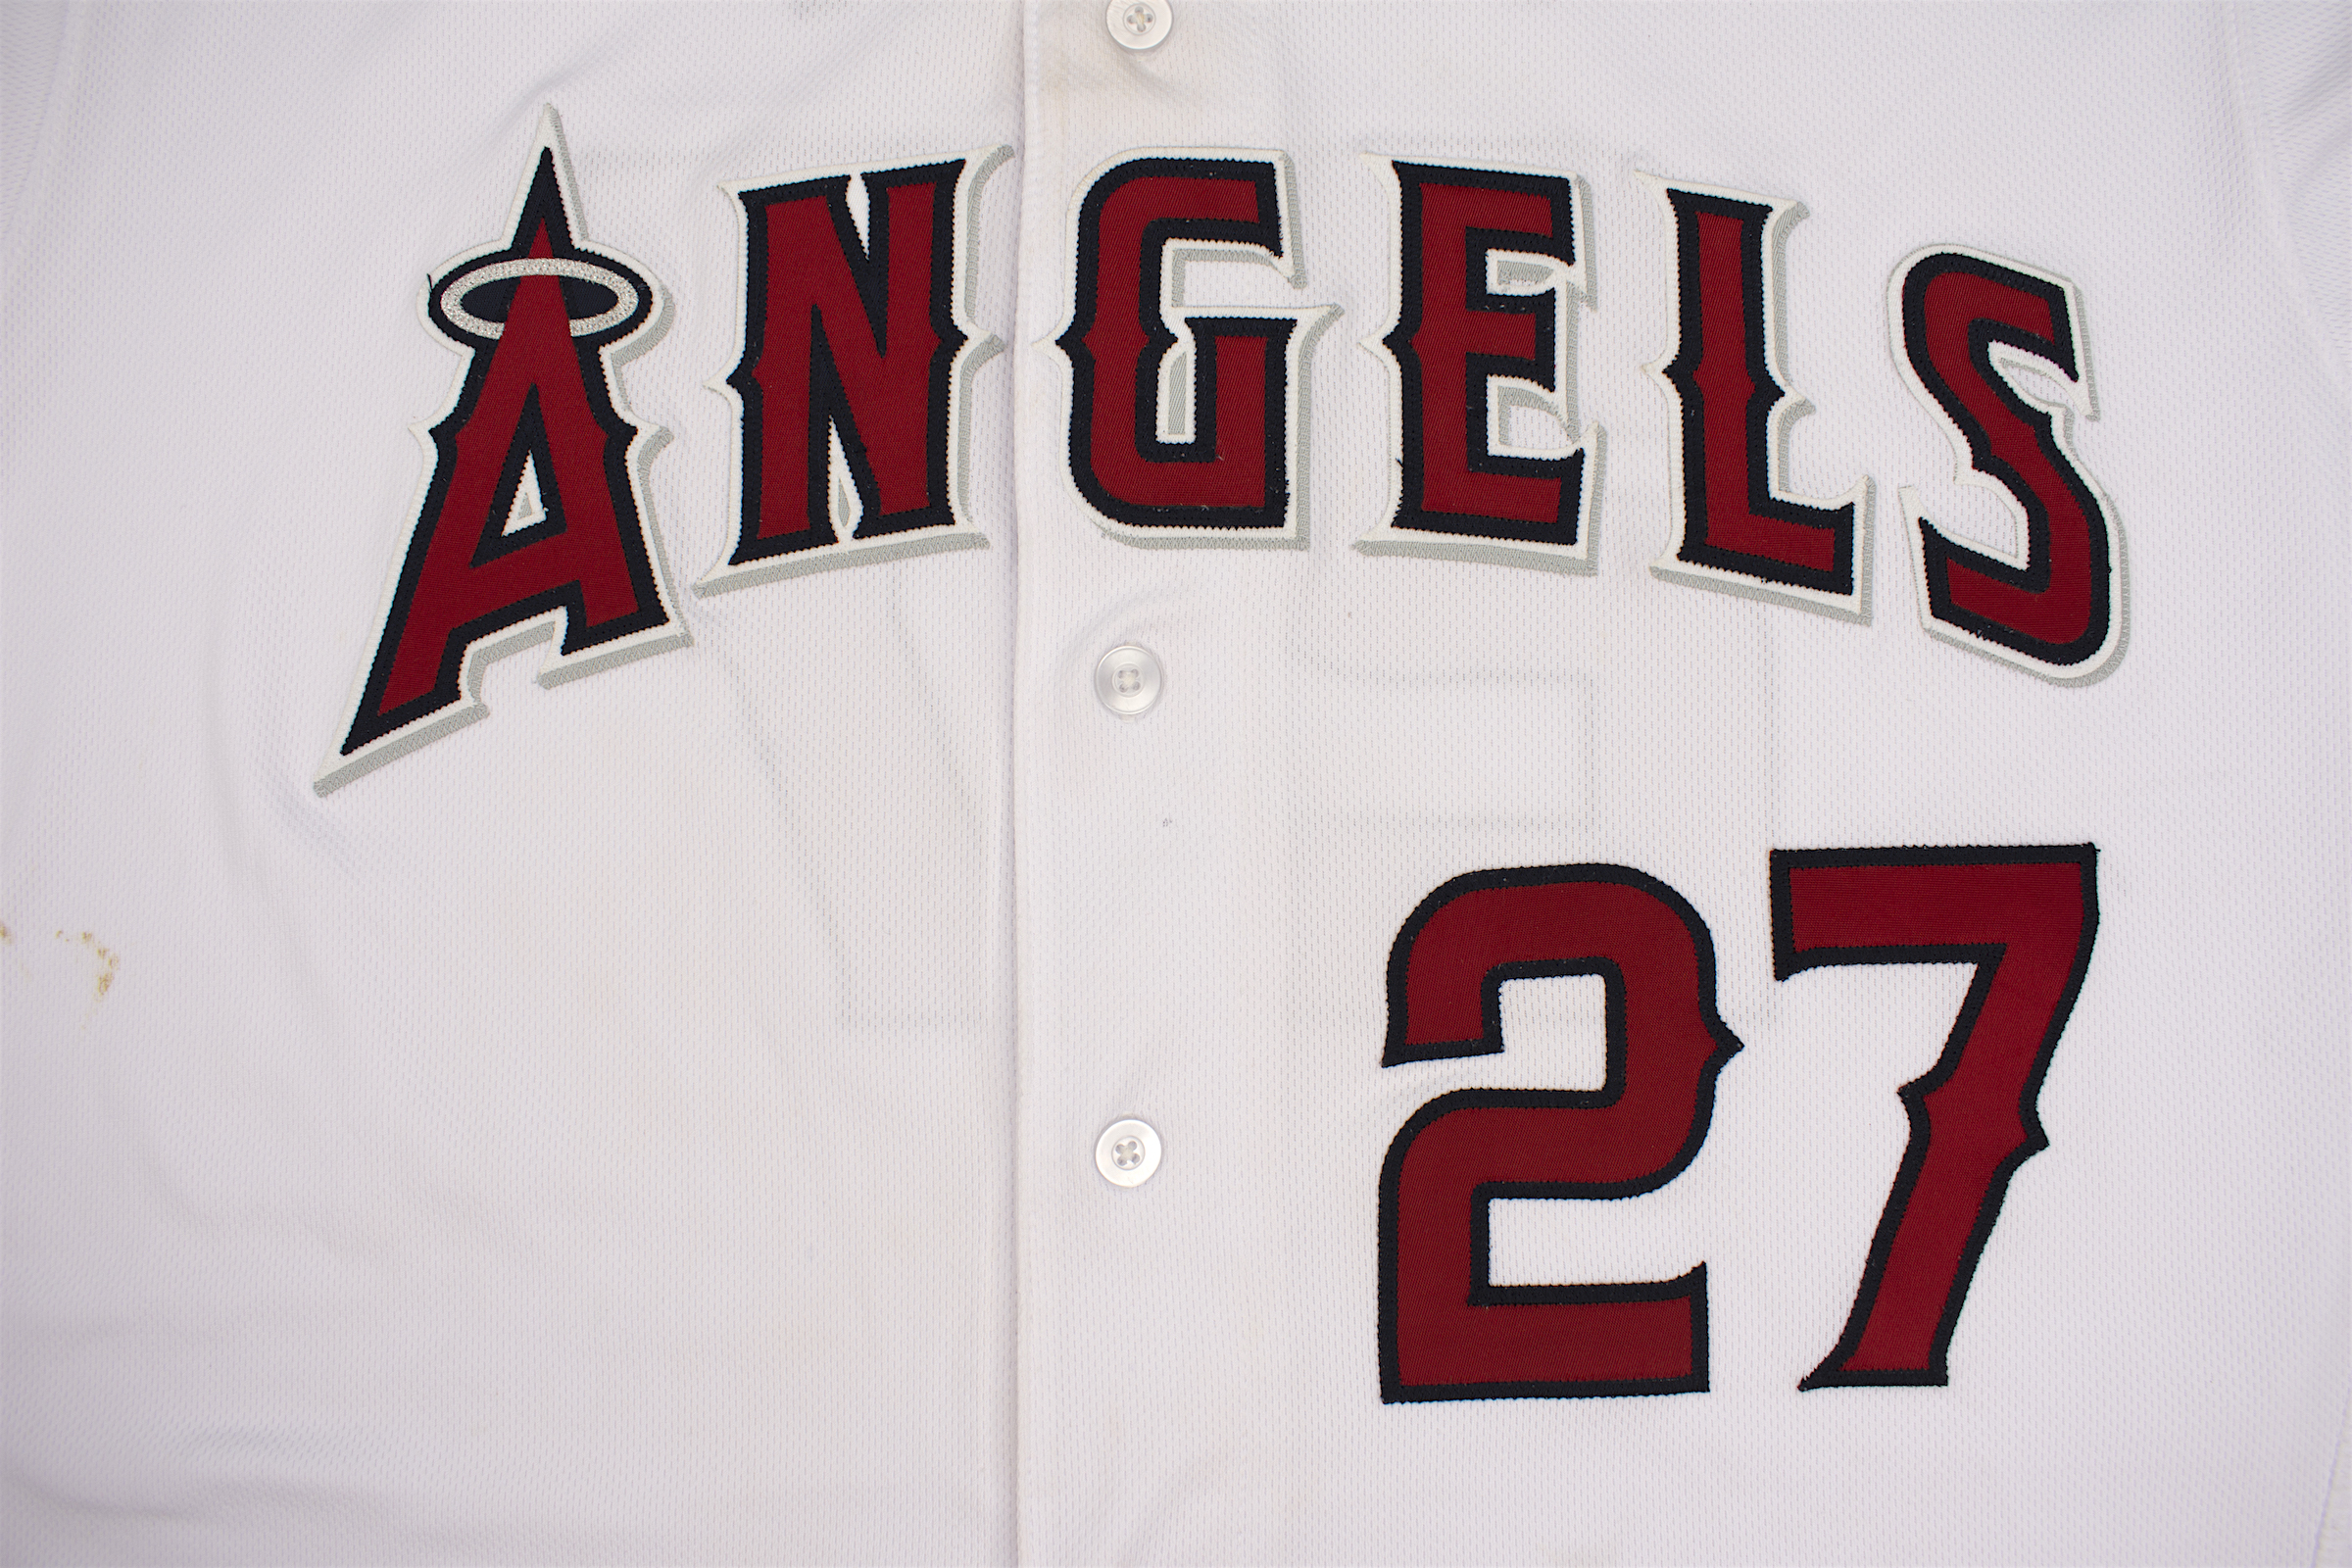 Mike Trout 2020 Game Used Jersey - 8/15/20 vs. LAD